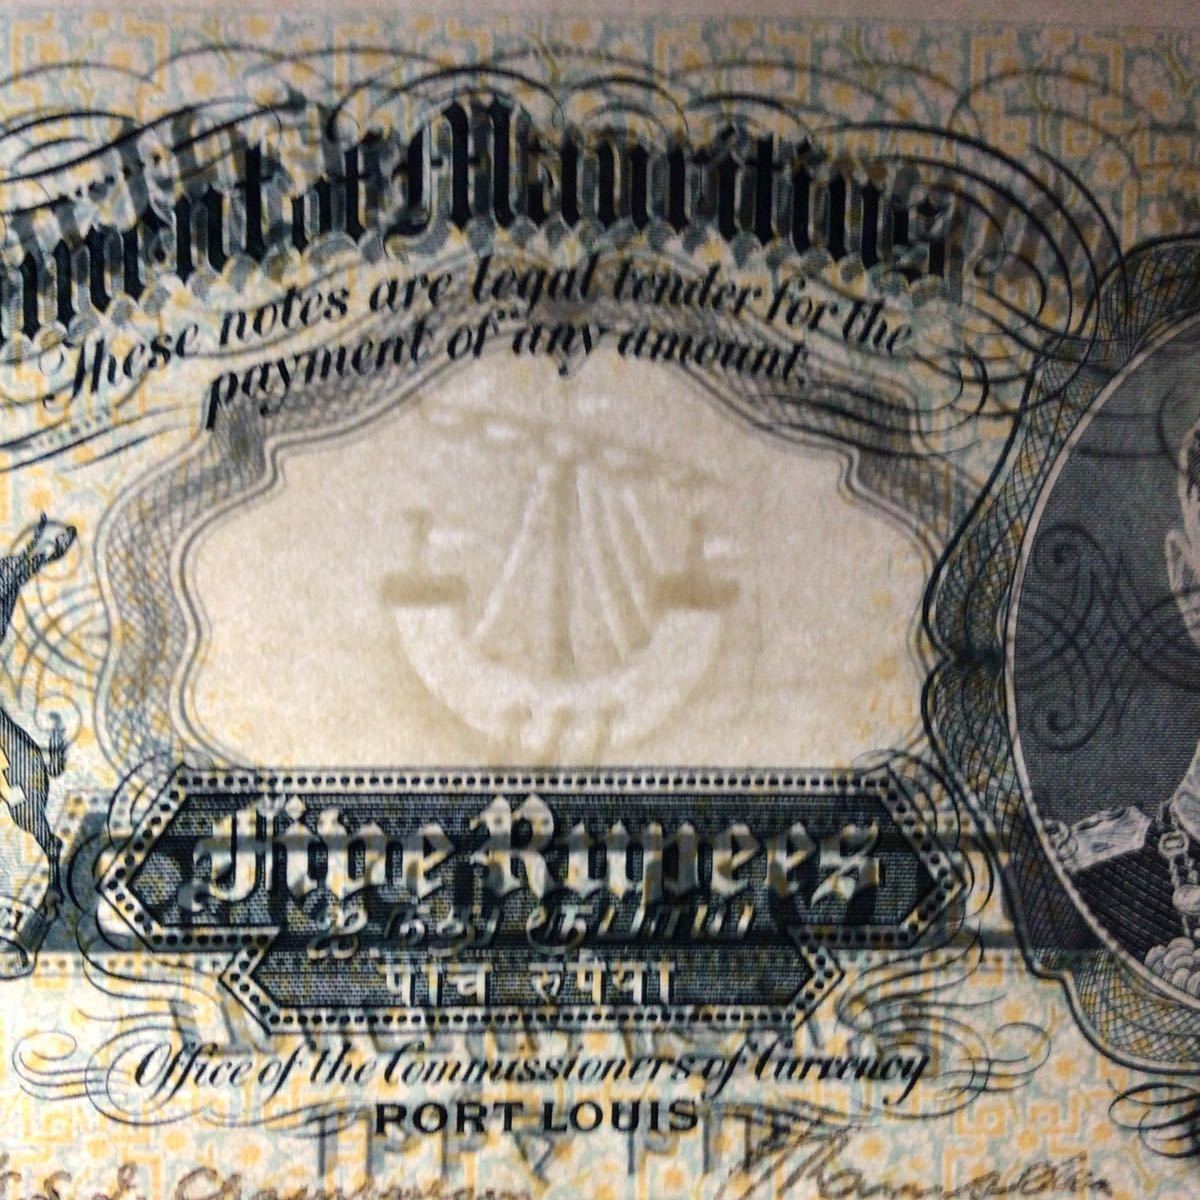 World Banknote Grading MAURITIUS《British Administration》5 Rupees【1937】『PMG Grading Choice Very Fine 35』_画像3